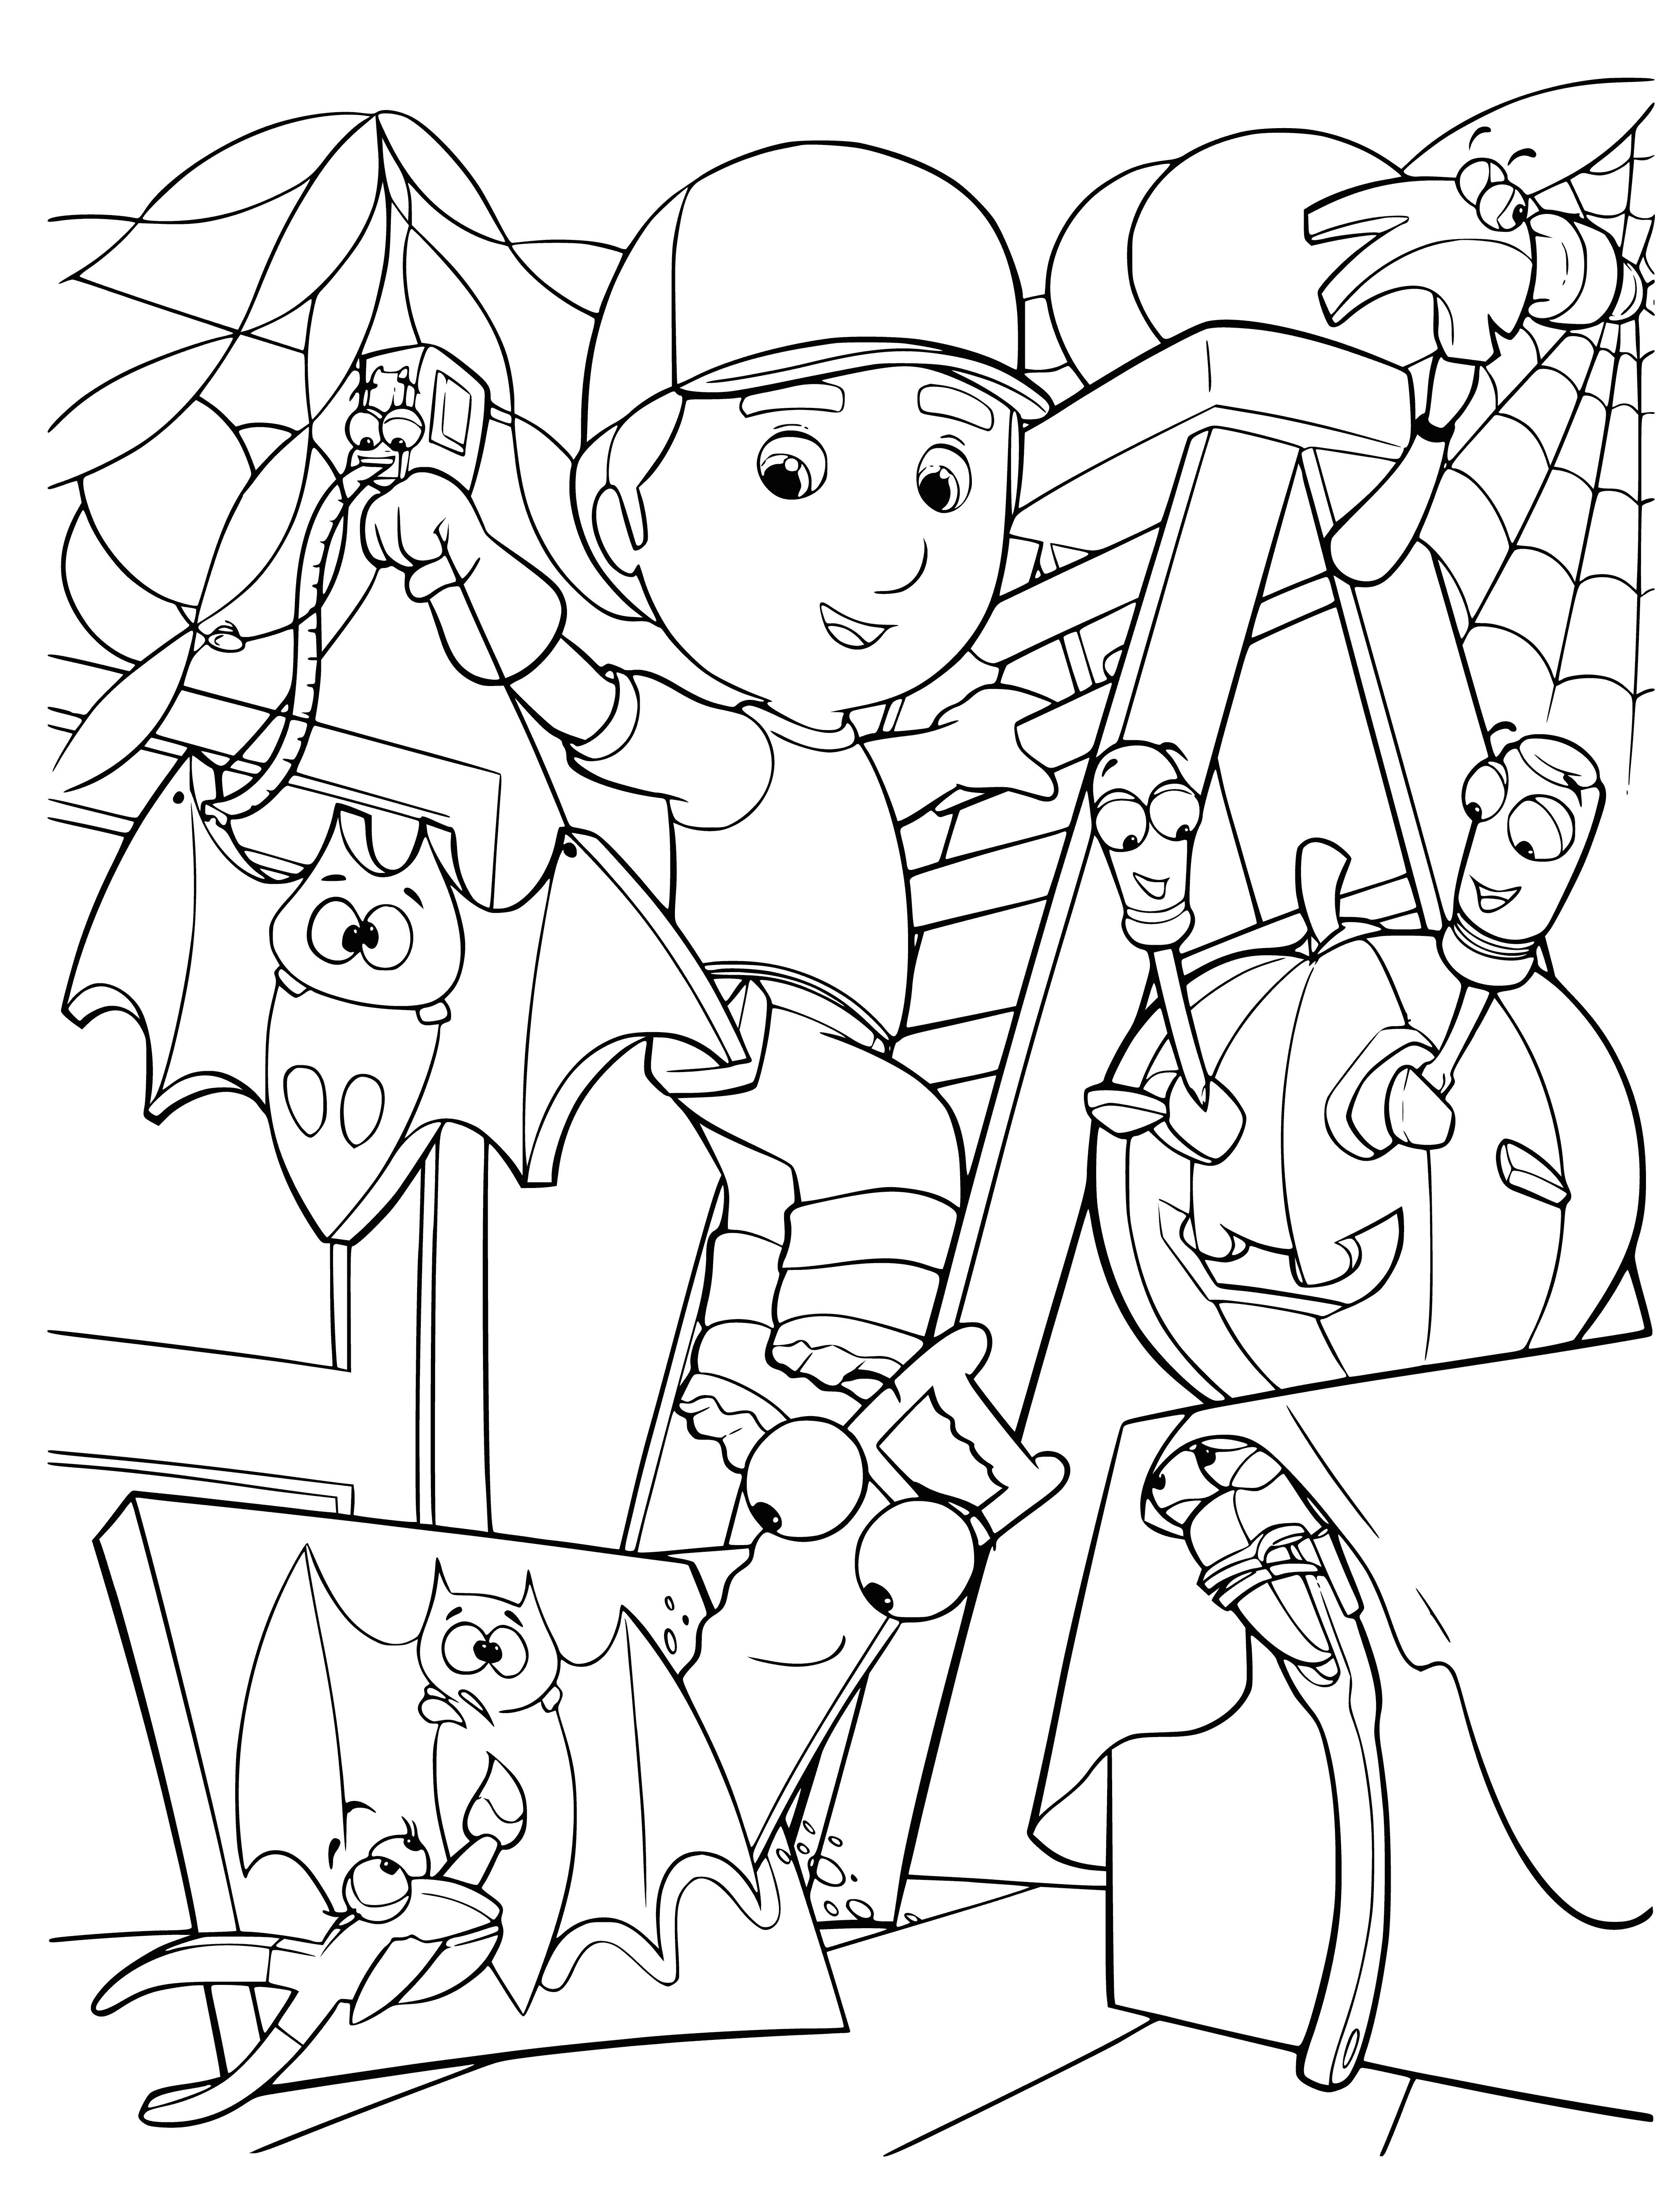 Handy Manny and the Tools Prepare for Halloween coloring page